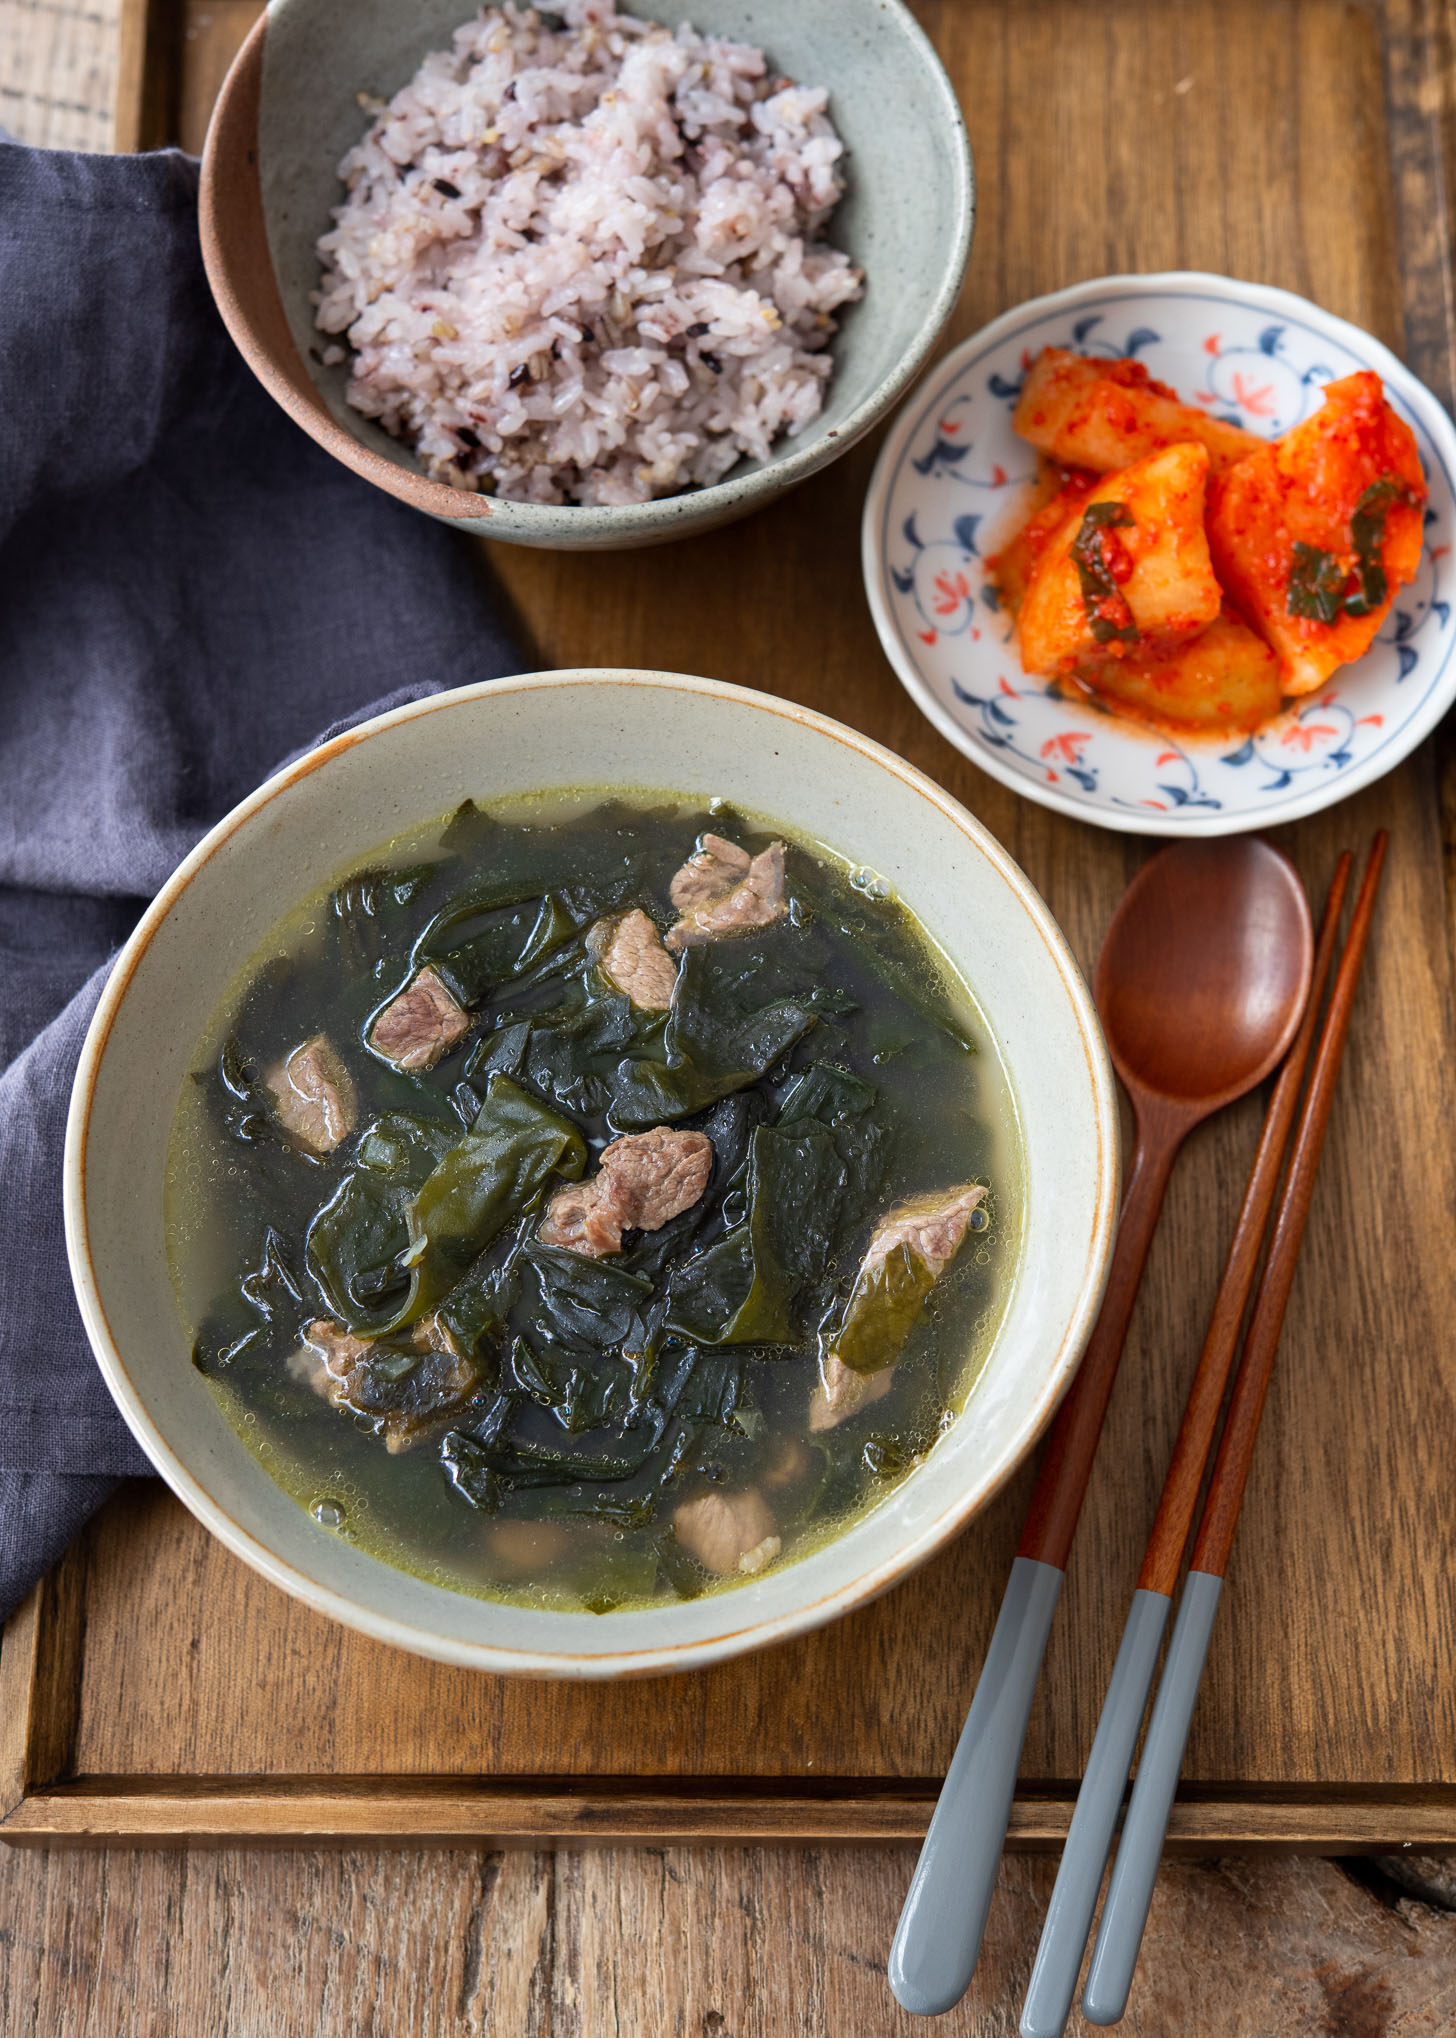 A bowl of seaweed soup is served with rice and kimchi on a tray.